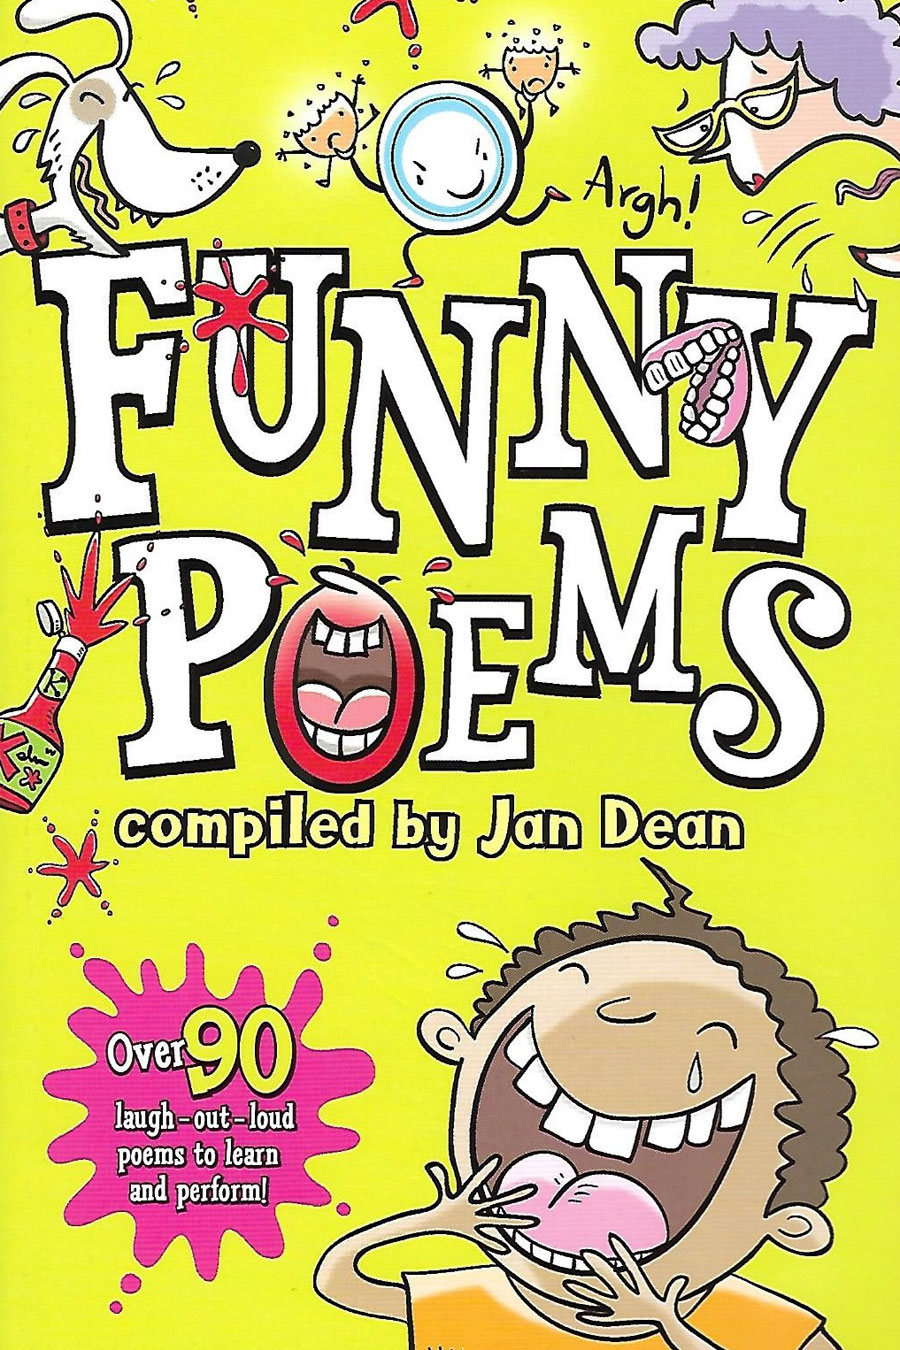 funny poems